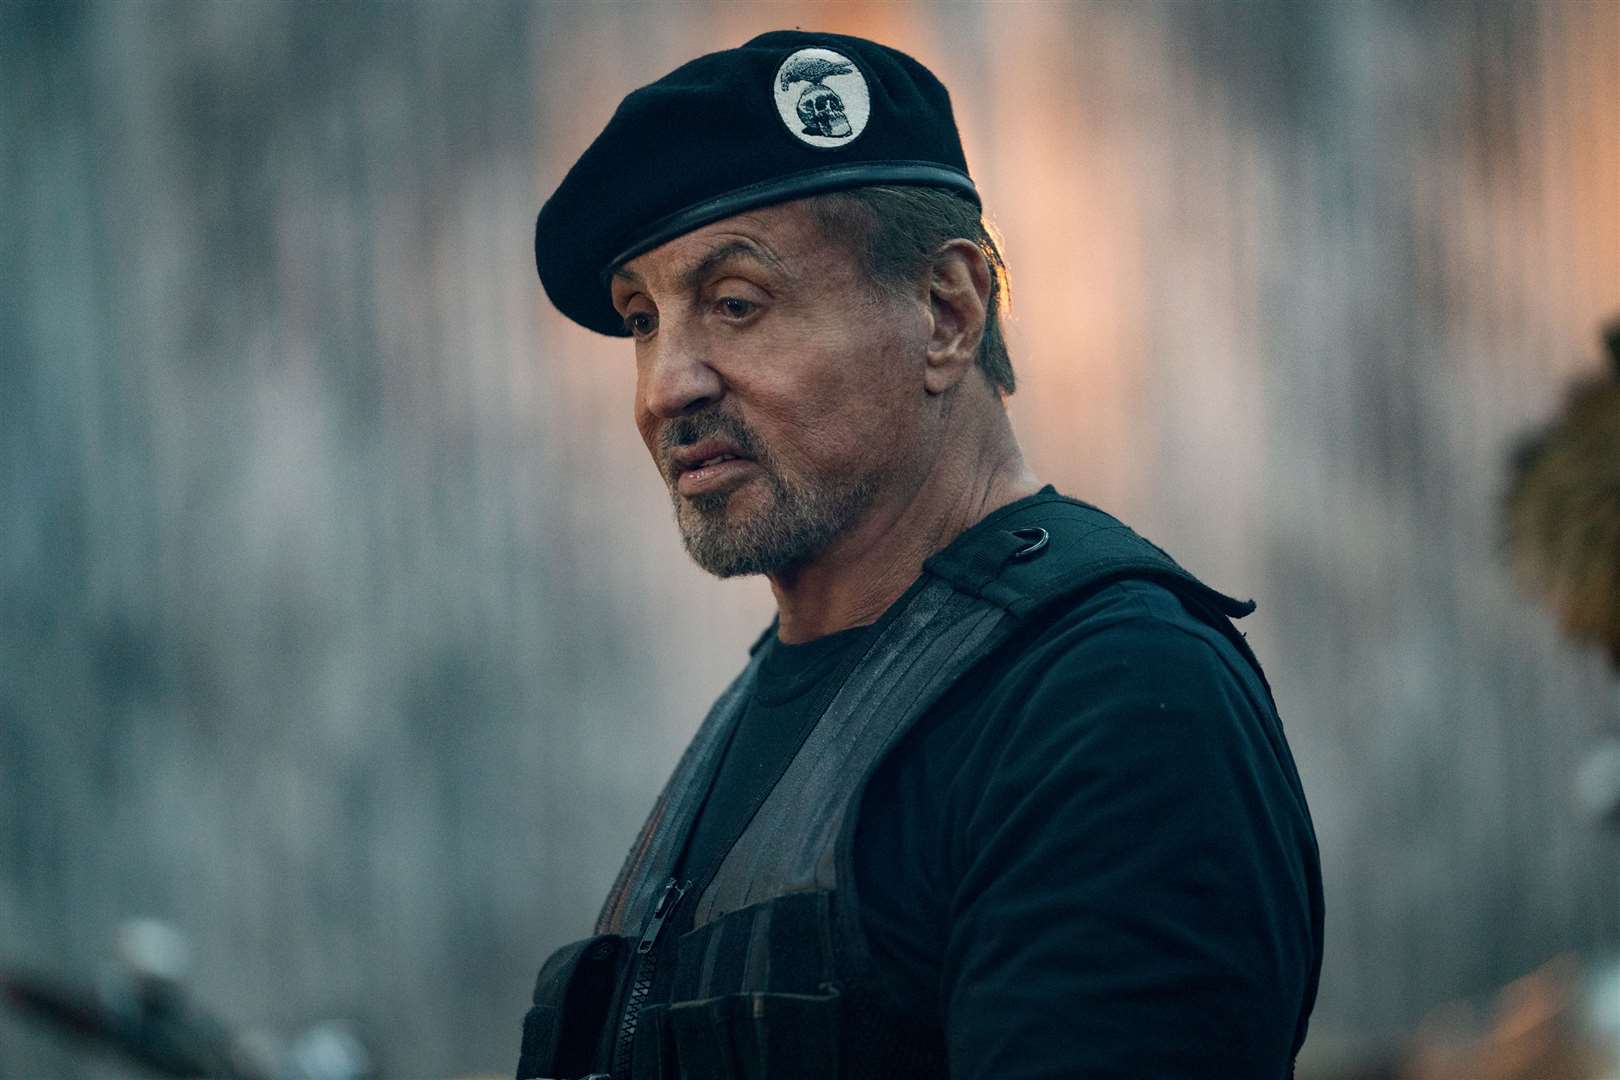 Expend4bles with Sylvester Stallone as Barney Ross. Picture: EX4 Productions, Inc /Lionsgate/Yana Blajeva © 2023 PA Media